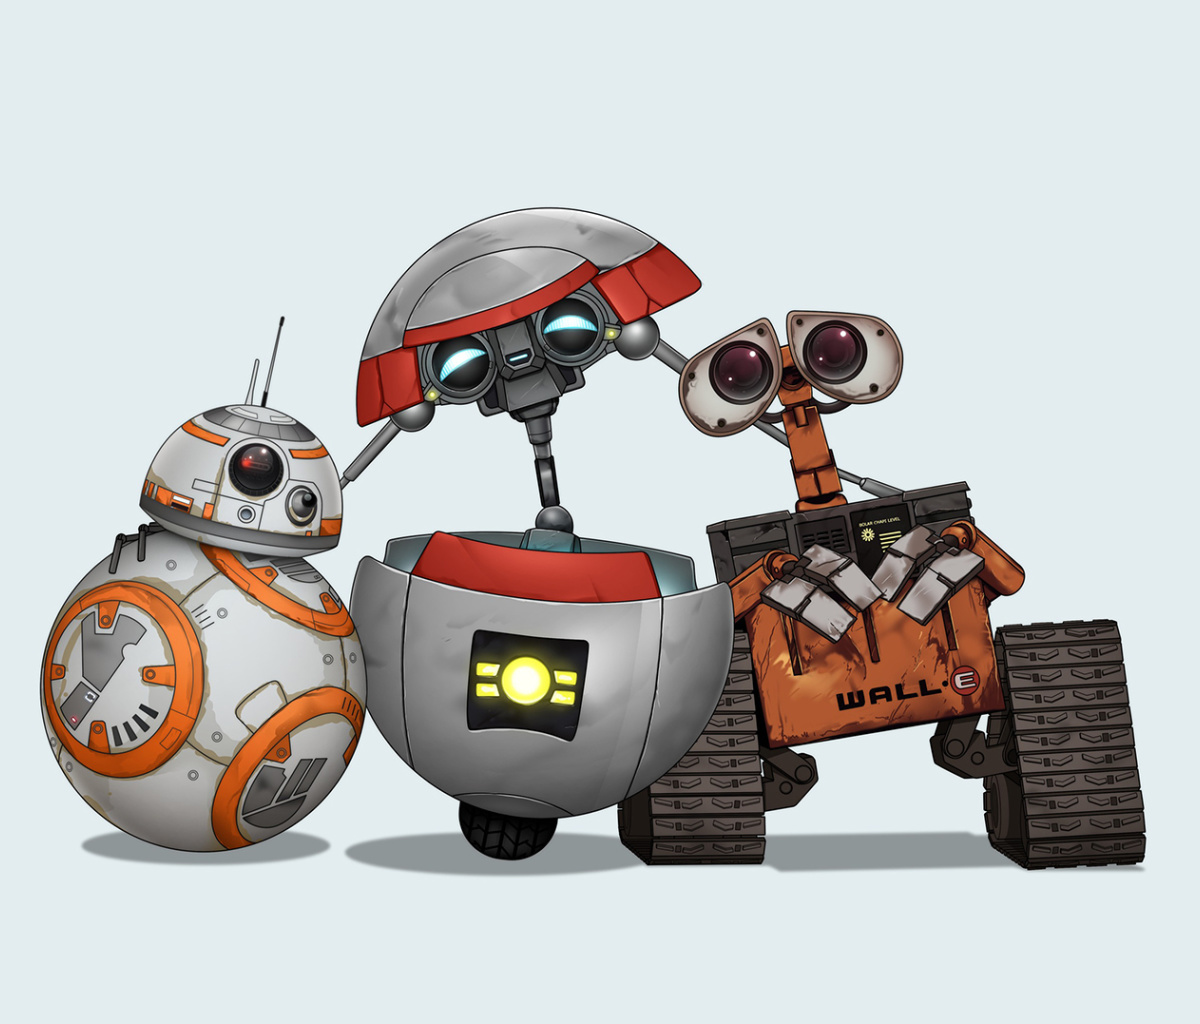 Star Wars and Walle wallpaper 1200x1024